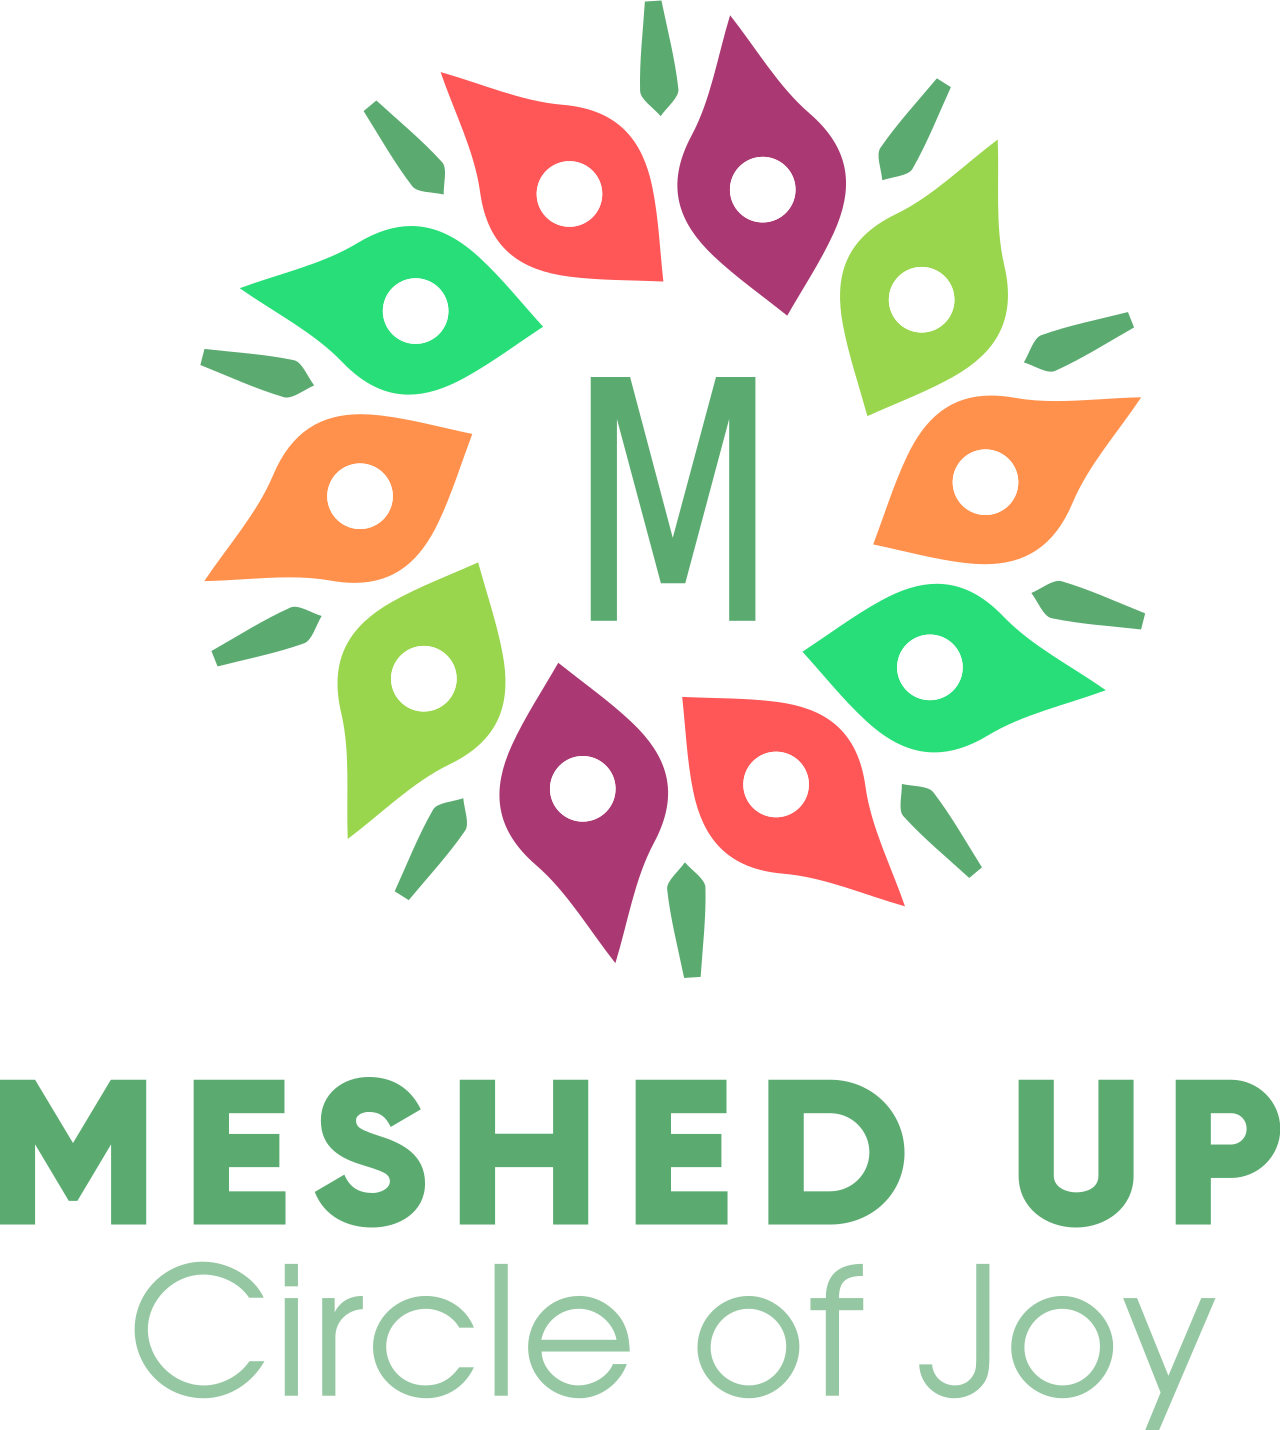 Meshed up 's web page